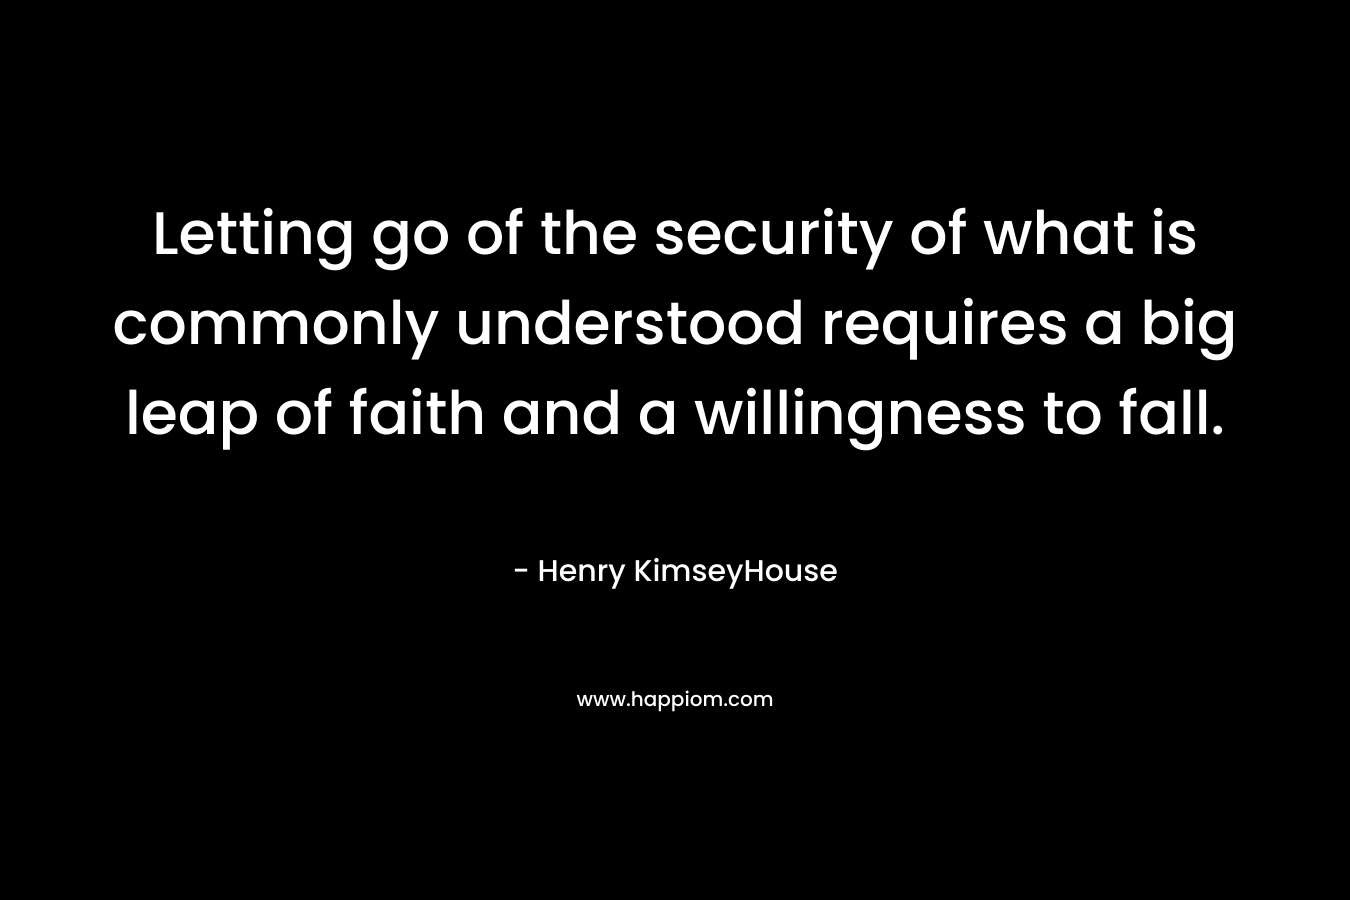 Letting go of the security of what is commonly understood requires a big leap of faith and a willingness to fall. – Henry KimseyHouse